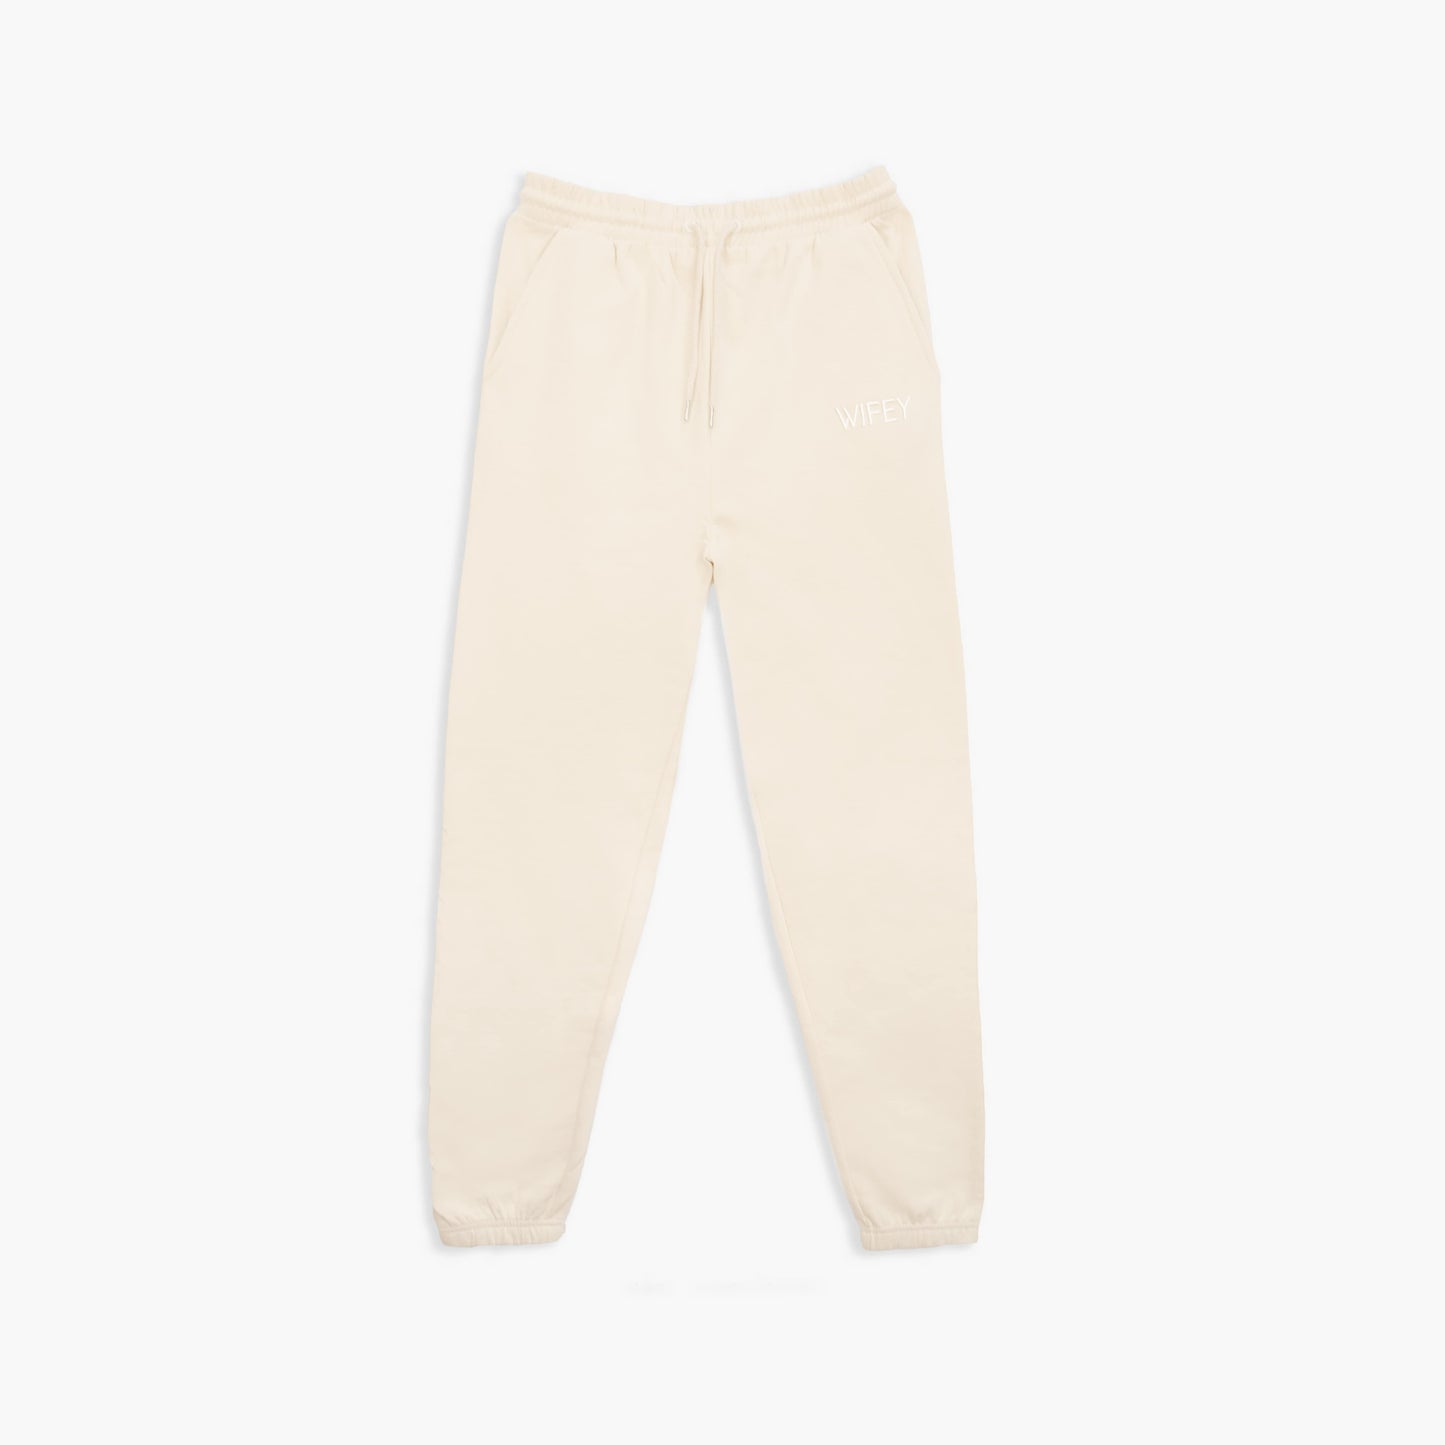 Wifey Embroidered Joggers - Ivory Cream